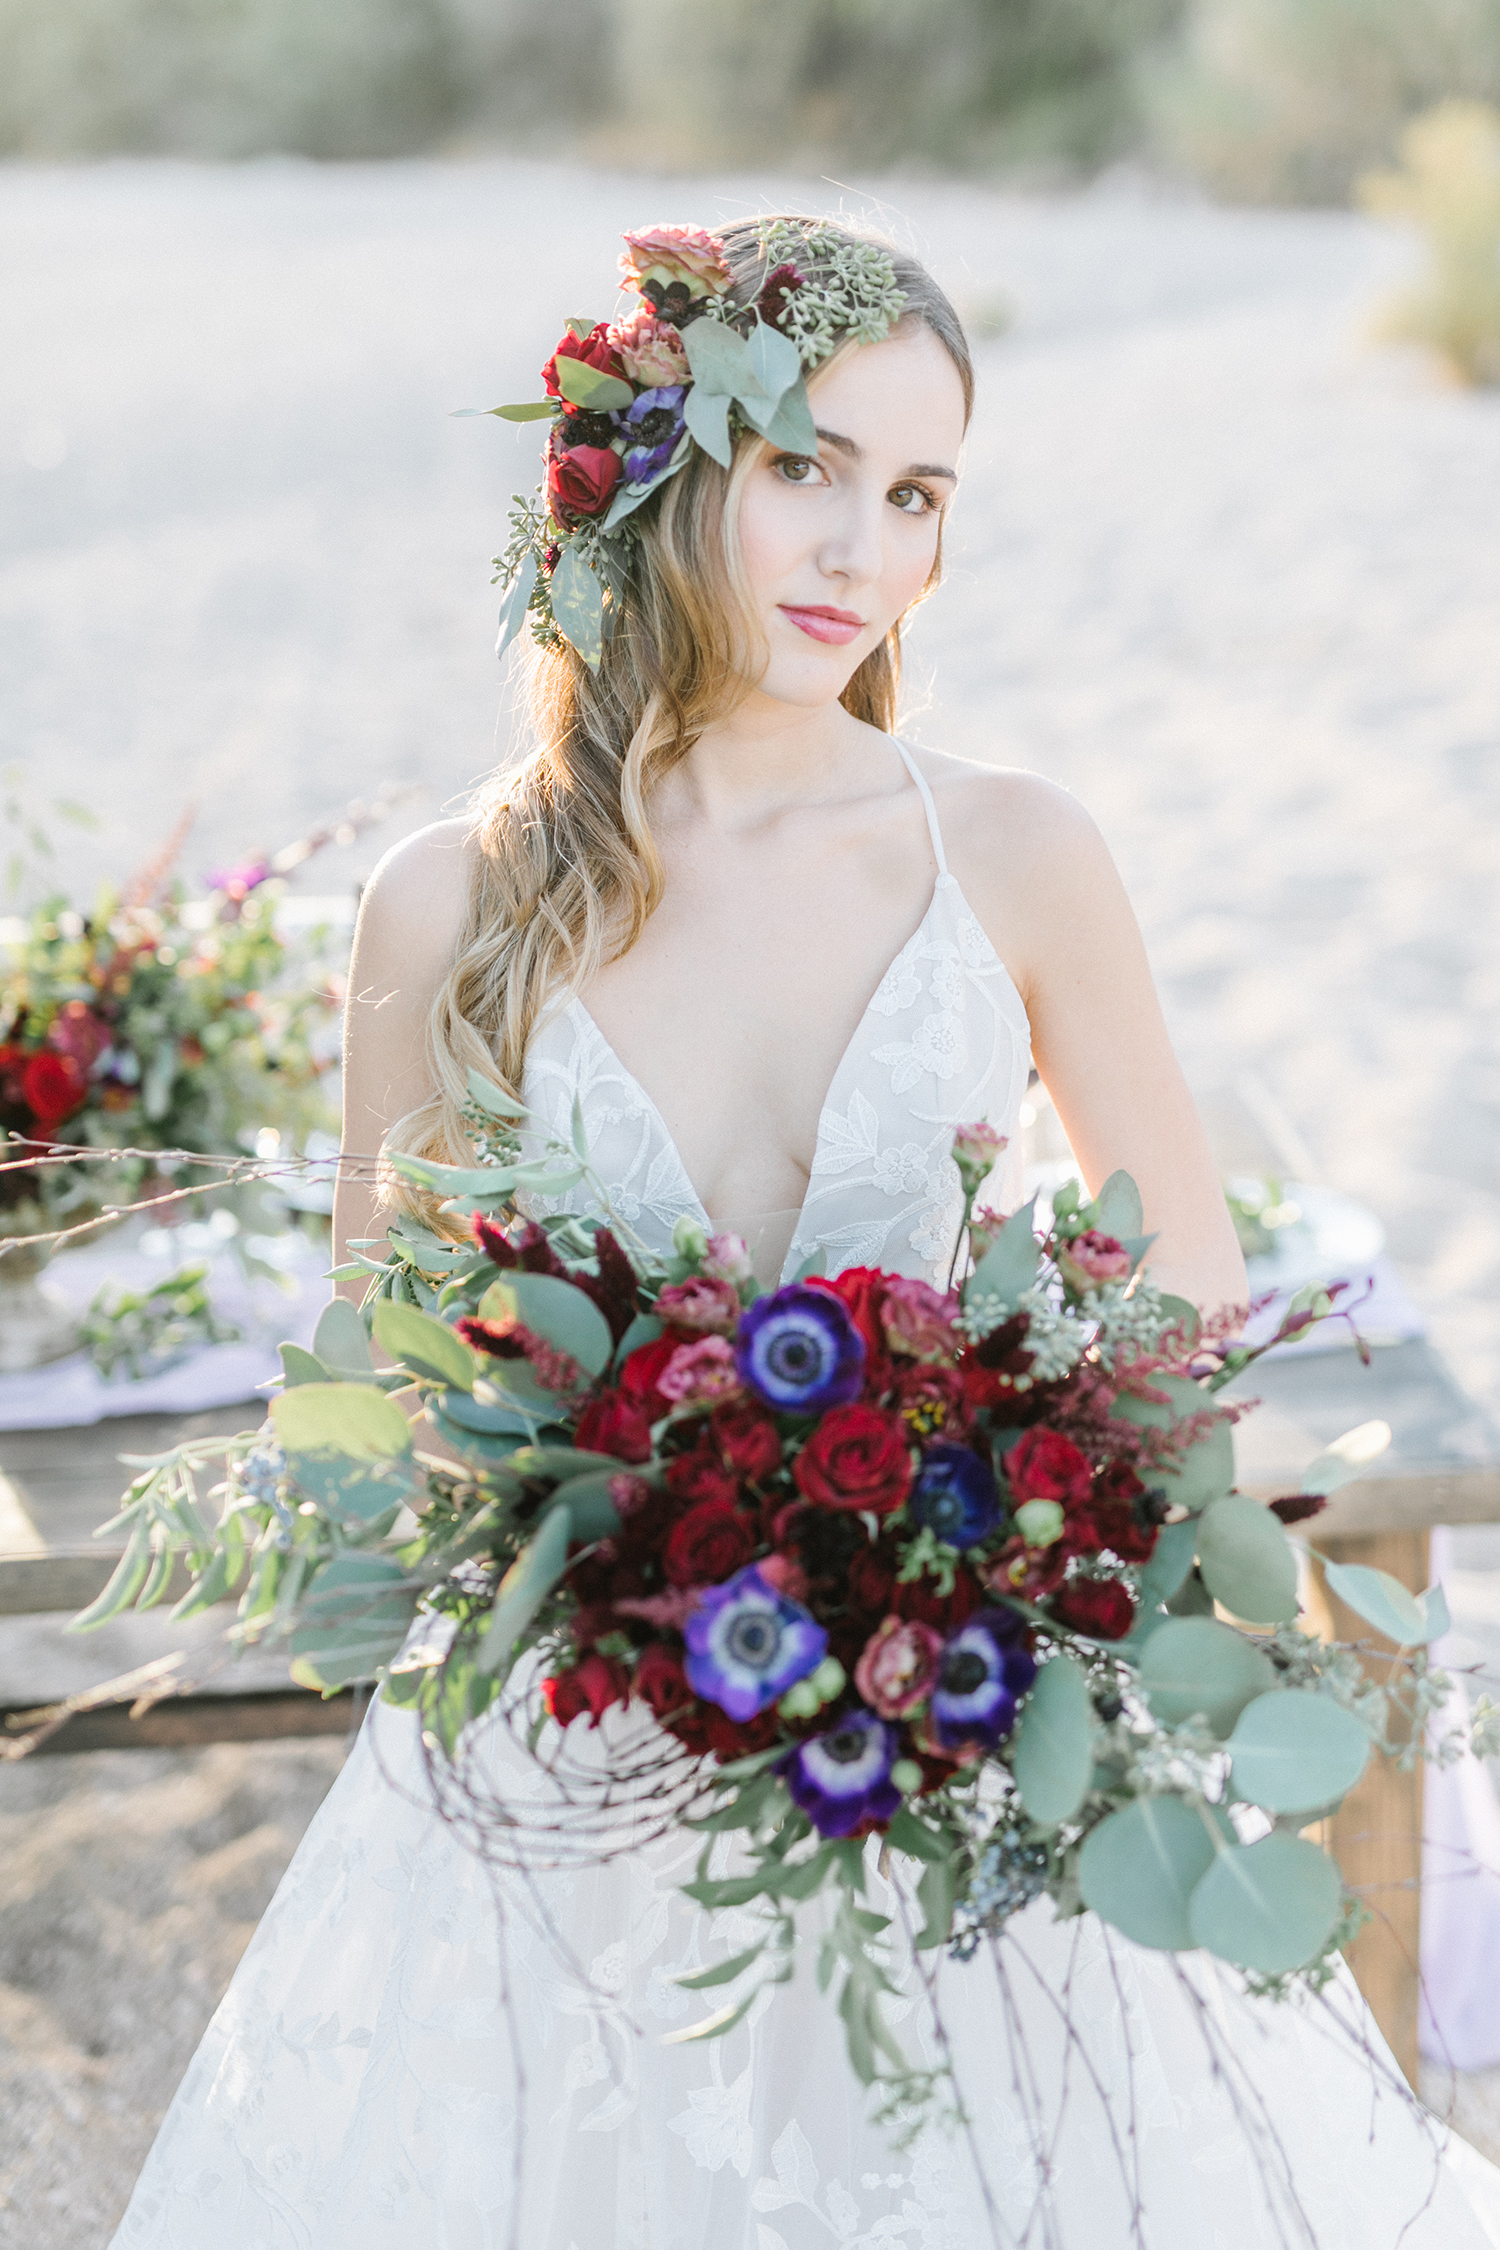 A bride and her horse. Beautiful styling by Rackel Gehlsen Weddings, Alexis Grace Florals, I Do Hair Makeup and Artistry, Raemie Reyes Makeup, J Bridal Boutique, and Hayley Paige #ArizonaWedding #ArizonaWeddingIdeas #ArizonaWeddingPhotography #WeddingIdeas #WeddingDecorations #WeddingDress #DesertWedding #DesertPhotoshoot #DesertEditorial #WeddingFlowerArrangements #WeddingHorsePictures #BrideHair #BrideHairStyleIdeas